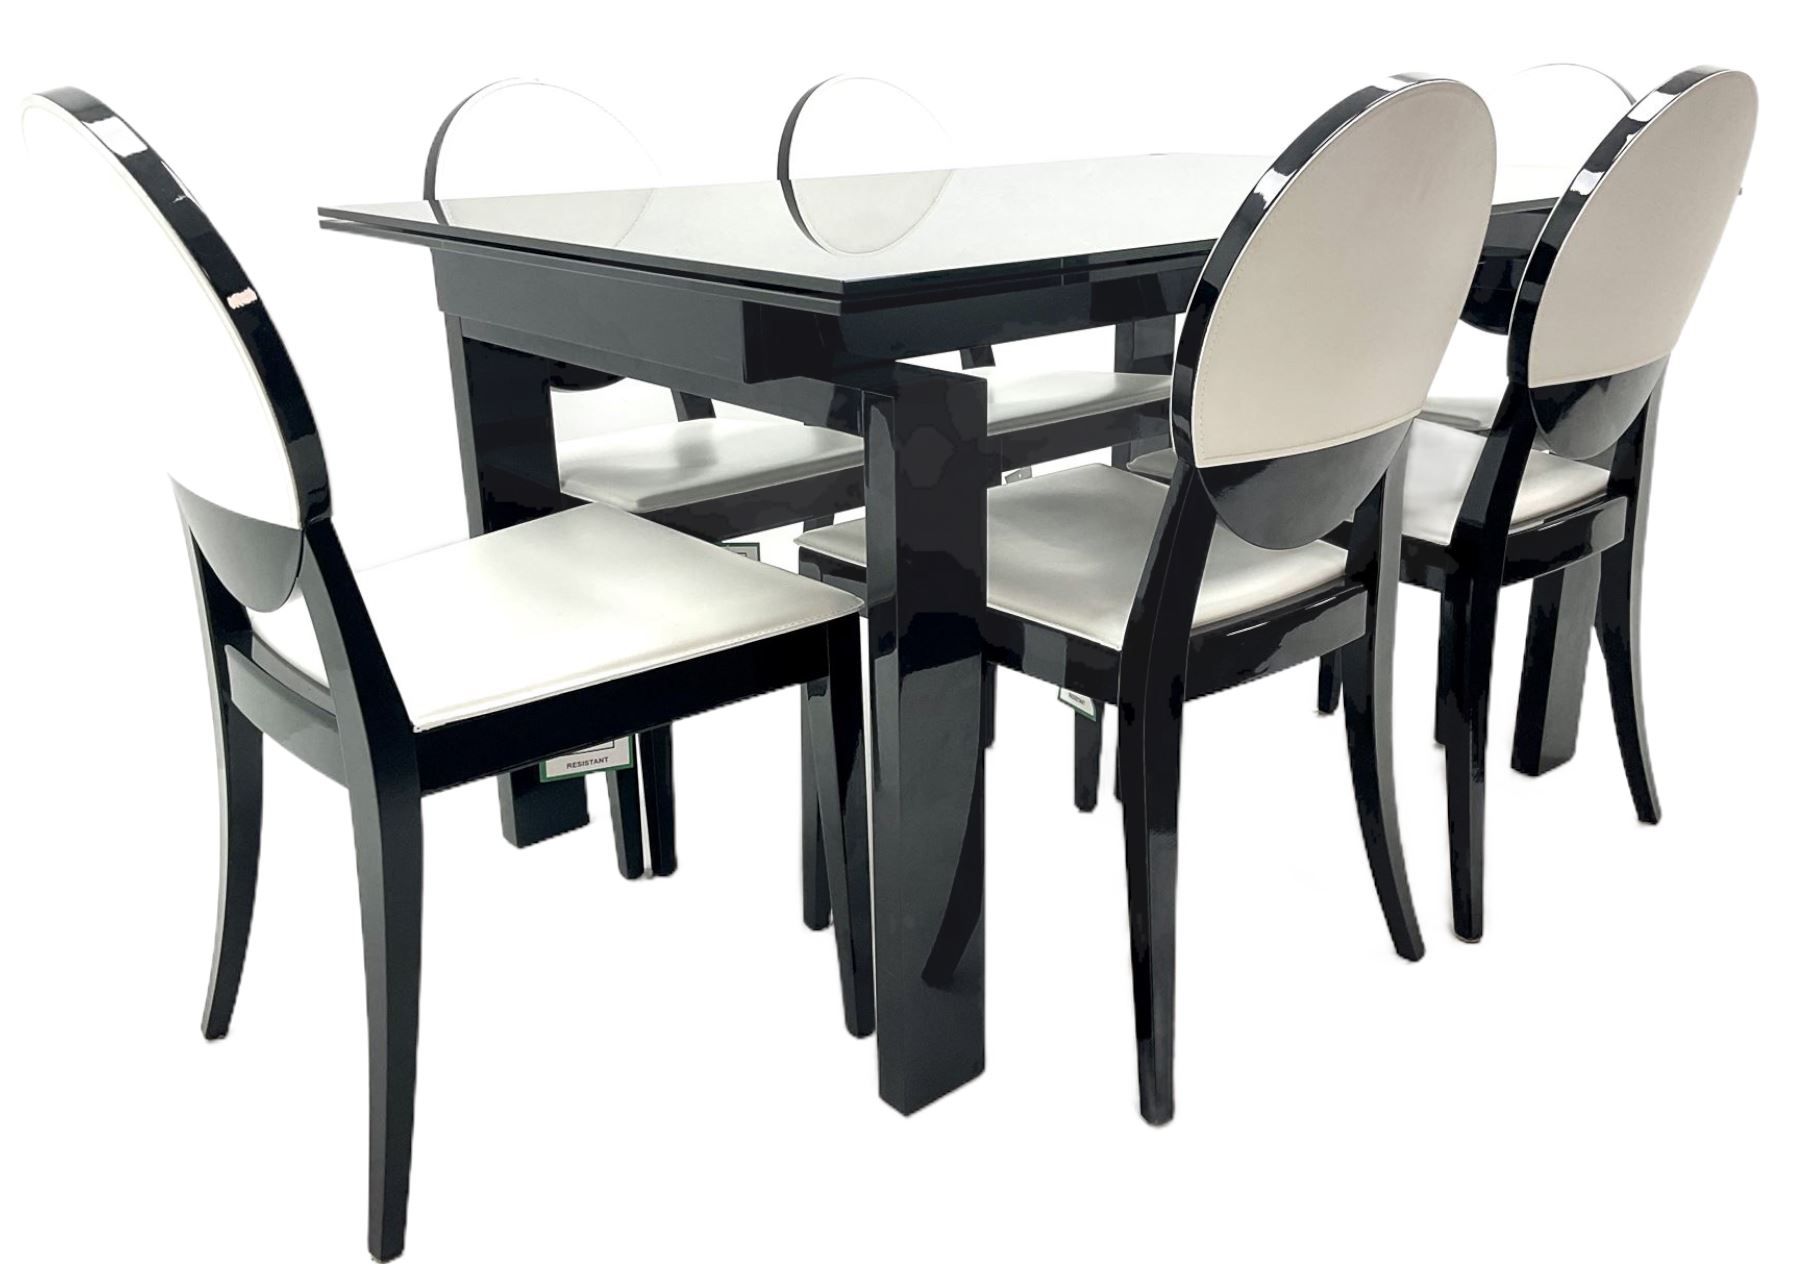 Casabella Dolce Vita black gloss and glass extending dining table - Image 3 of 6